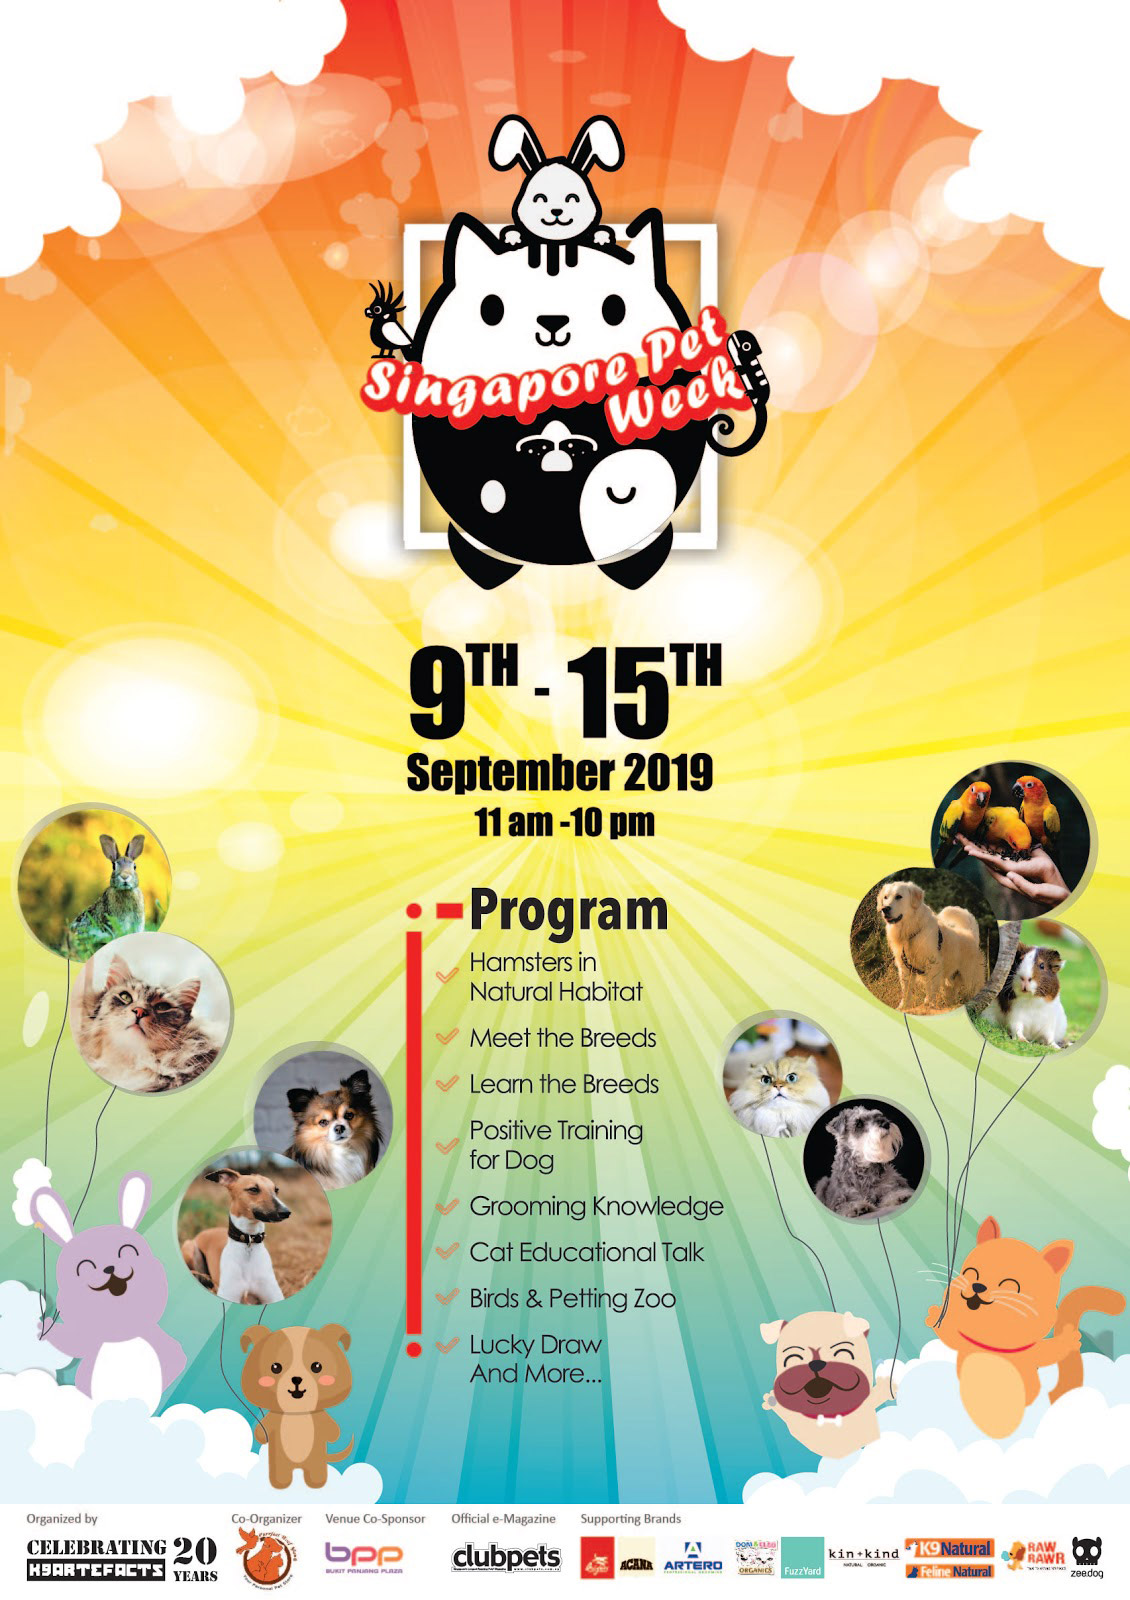 Win Prizes, Meet Furry Friends & Learn About Dog Breeds at Singapore Pet Week 2019!